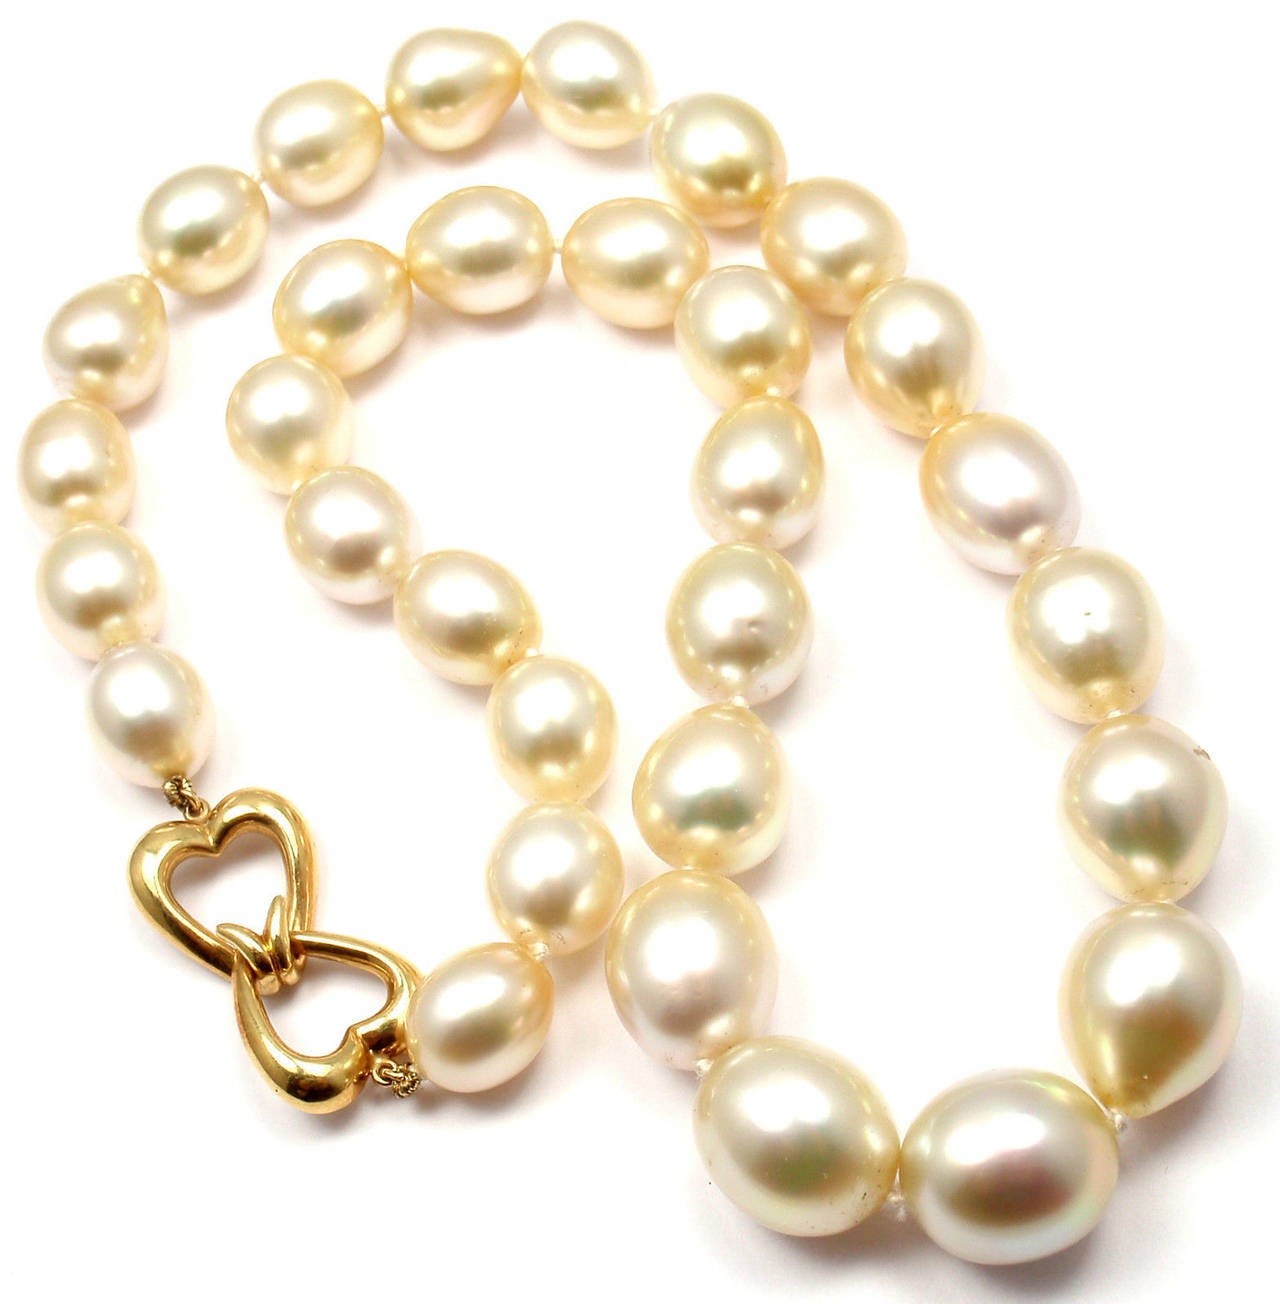 18k Yellow Gold Golden Tahitian Pearl Necklace by Andrew Clunn. 
With 31 total Golden Tahitian pearls from 13mm to 11mm.

Details: 
Necklace Length: 18